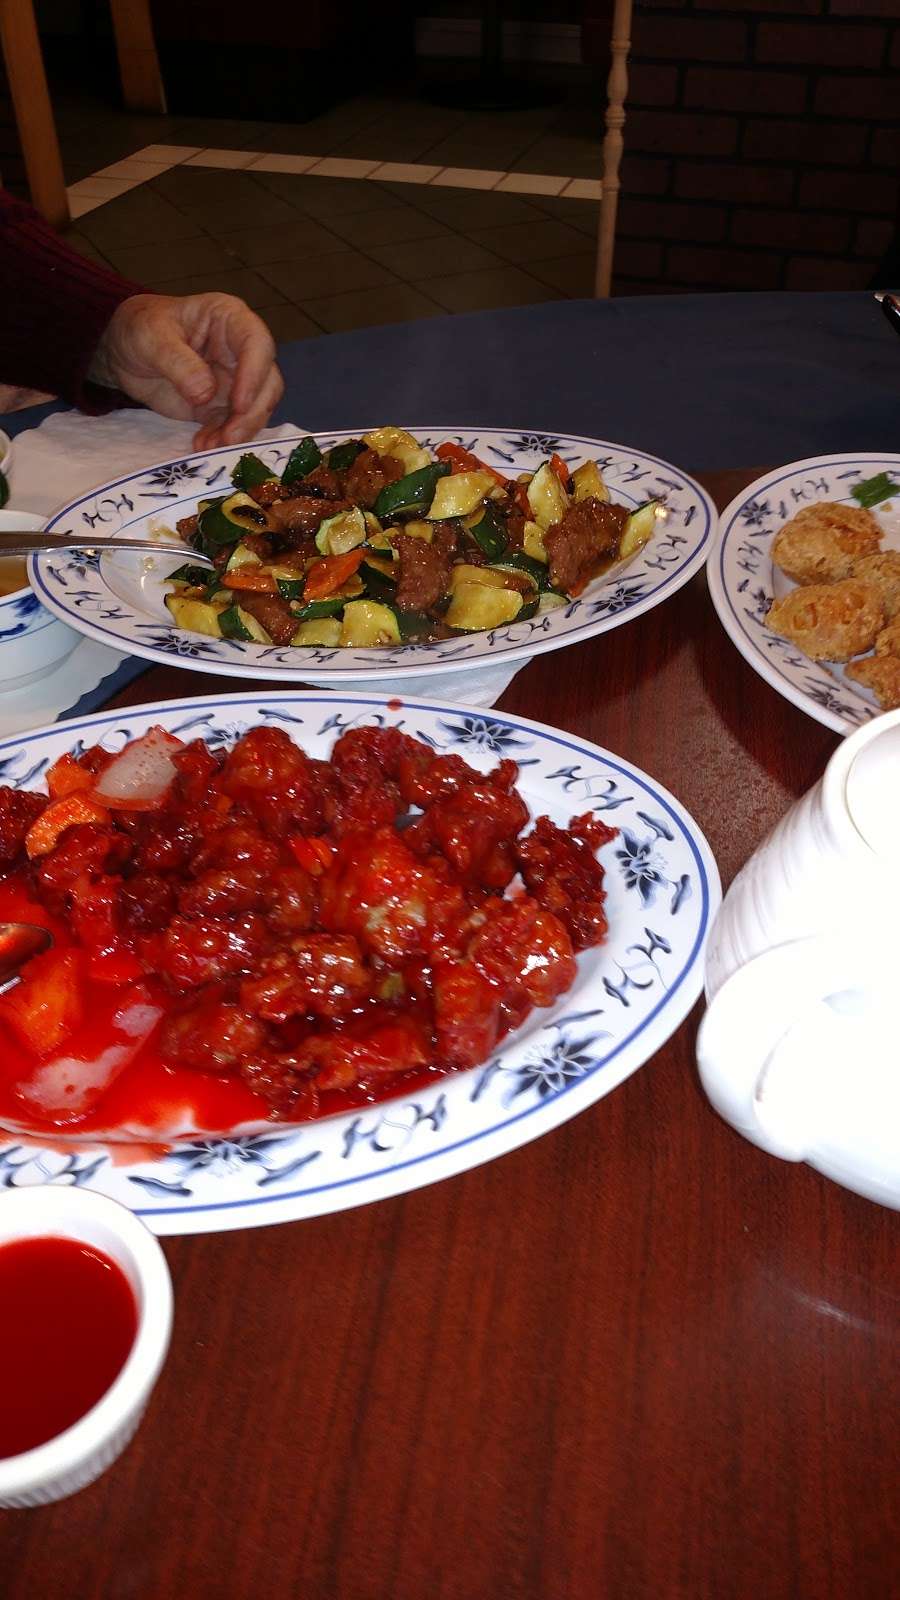 Lone Tree Drive In Chinese | 8383 Lone Tree Way, Brentwood, CA 94513 | Phone: (925) 634-4629